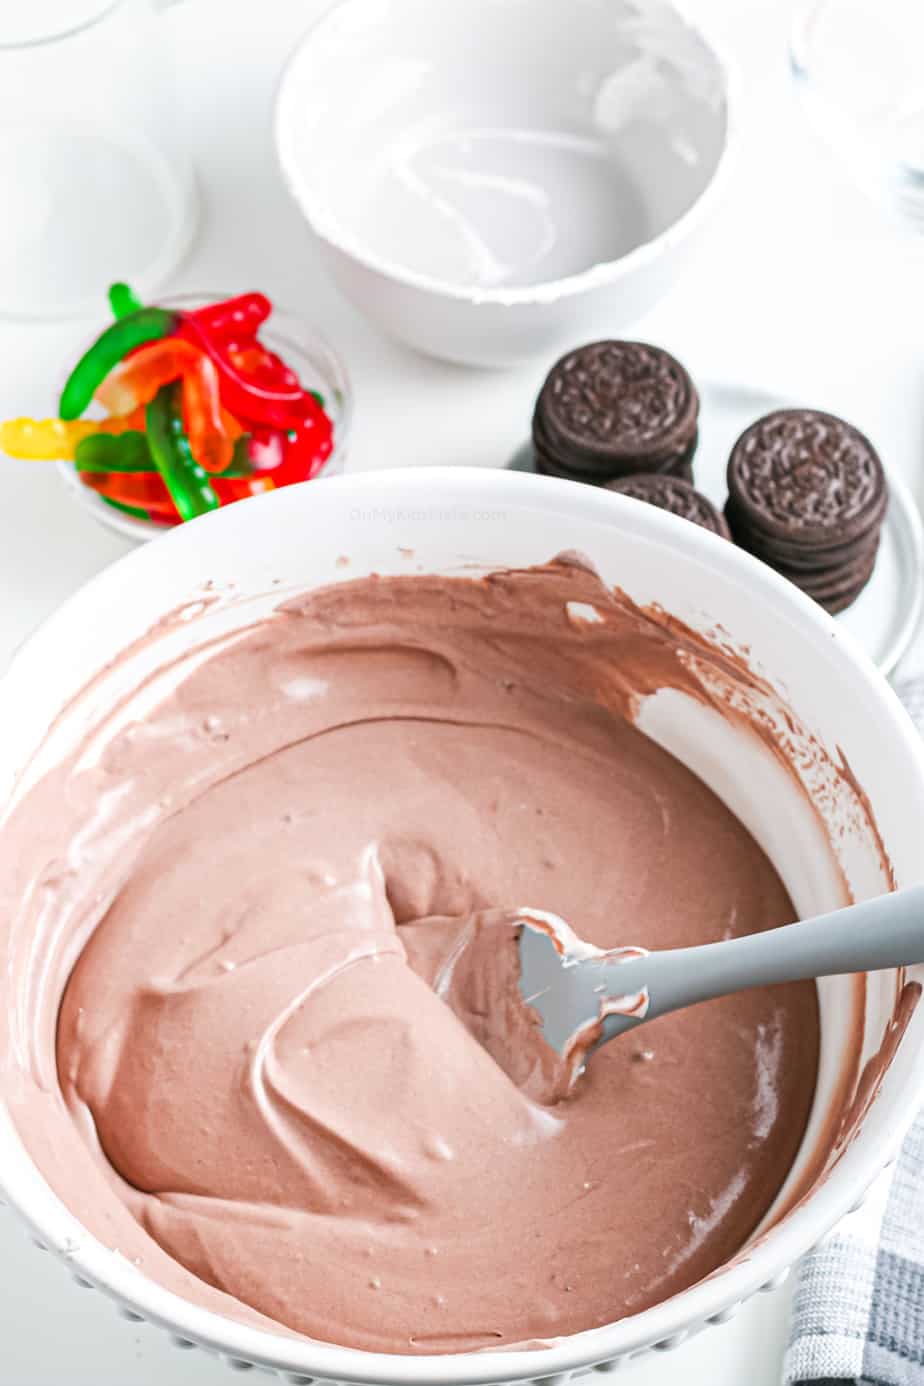 Chocolate pudding and whipped topping mixed together with a spatula in a bowl.